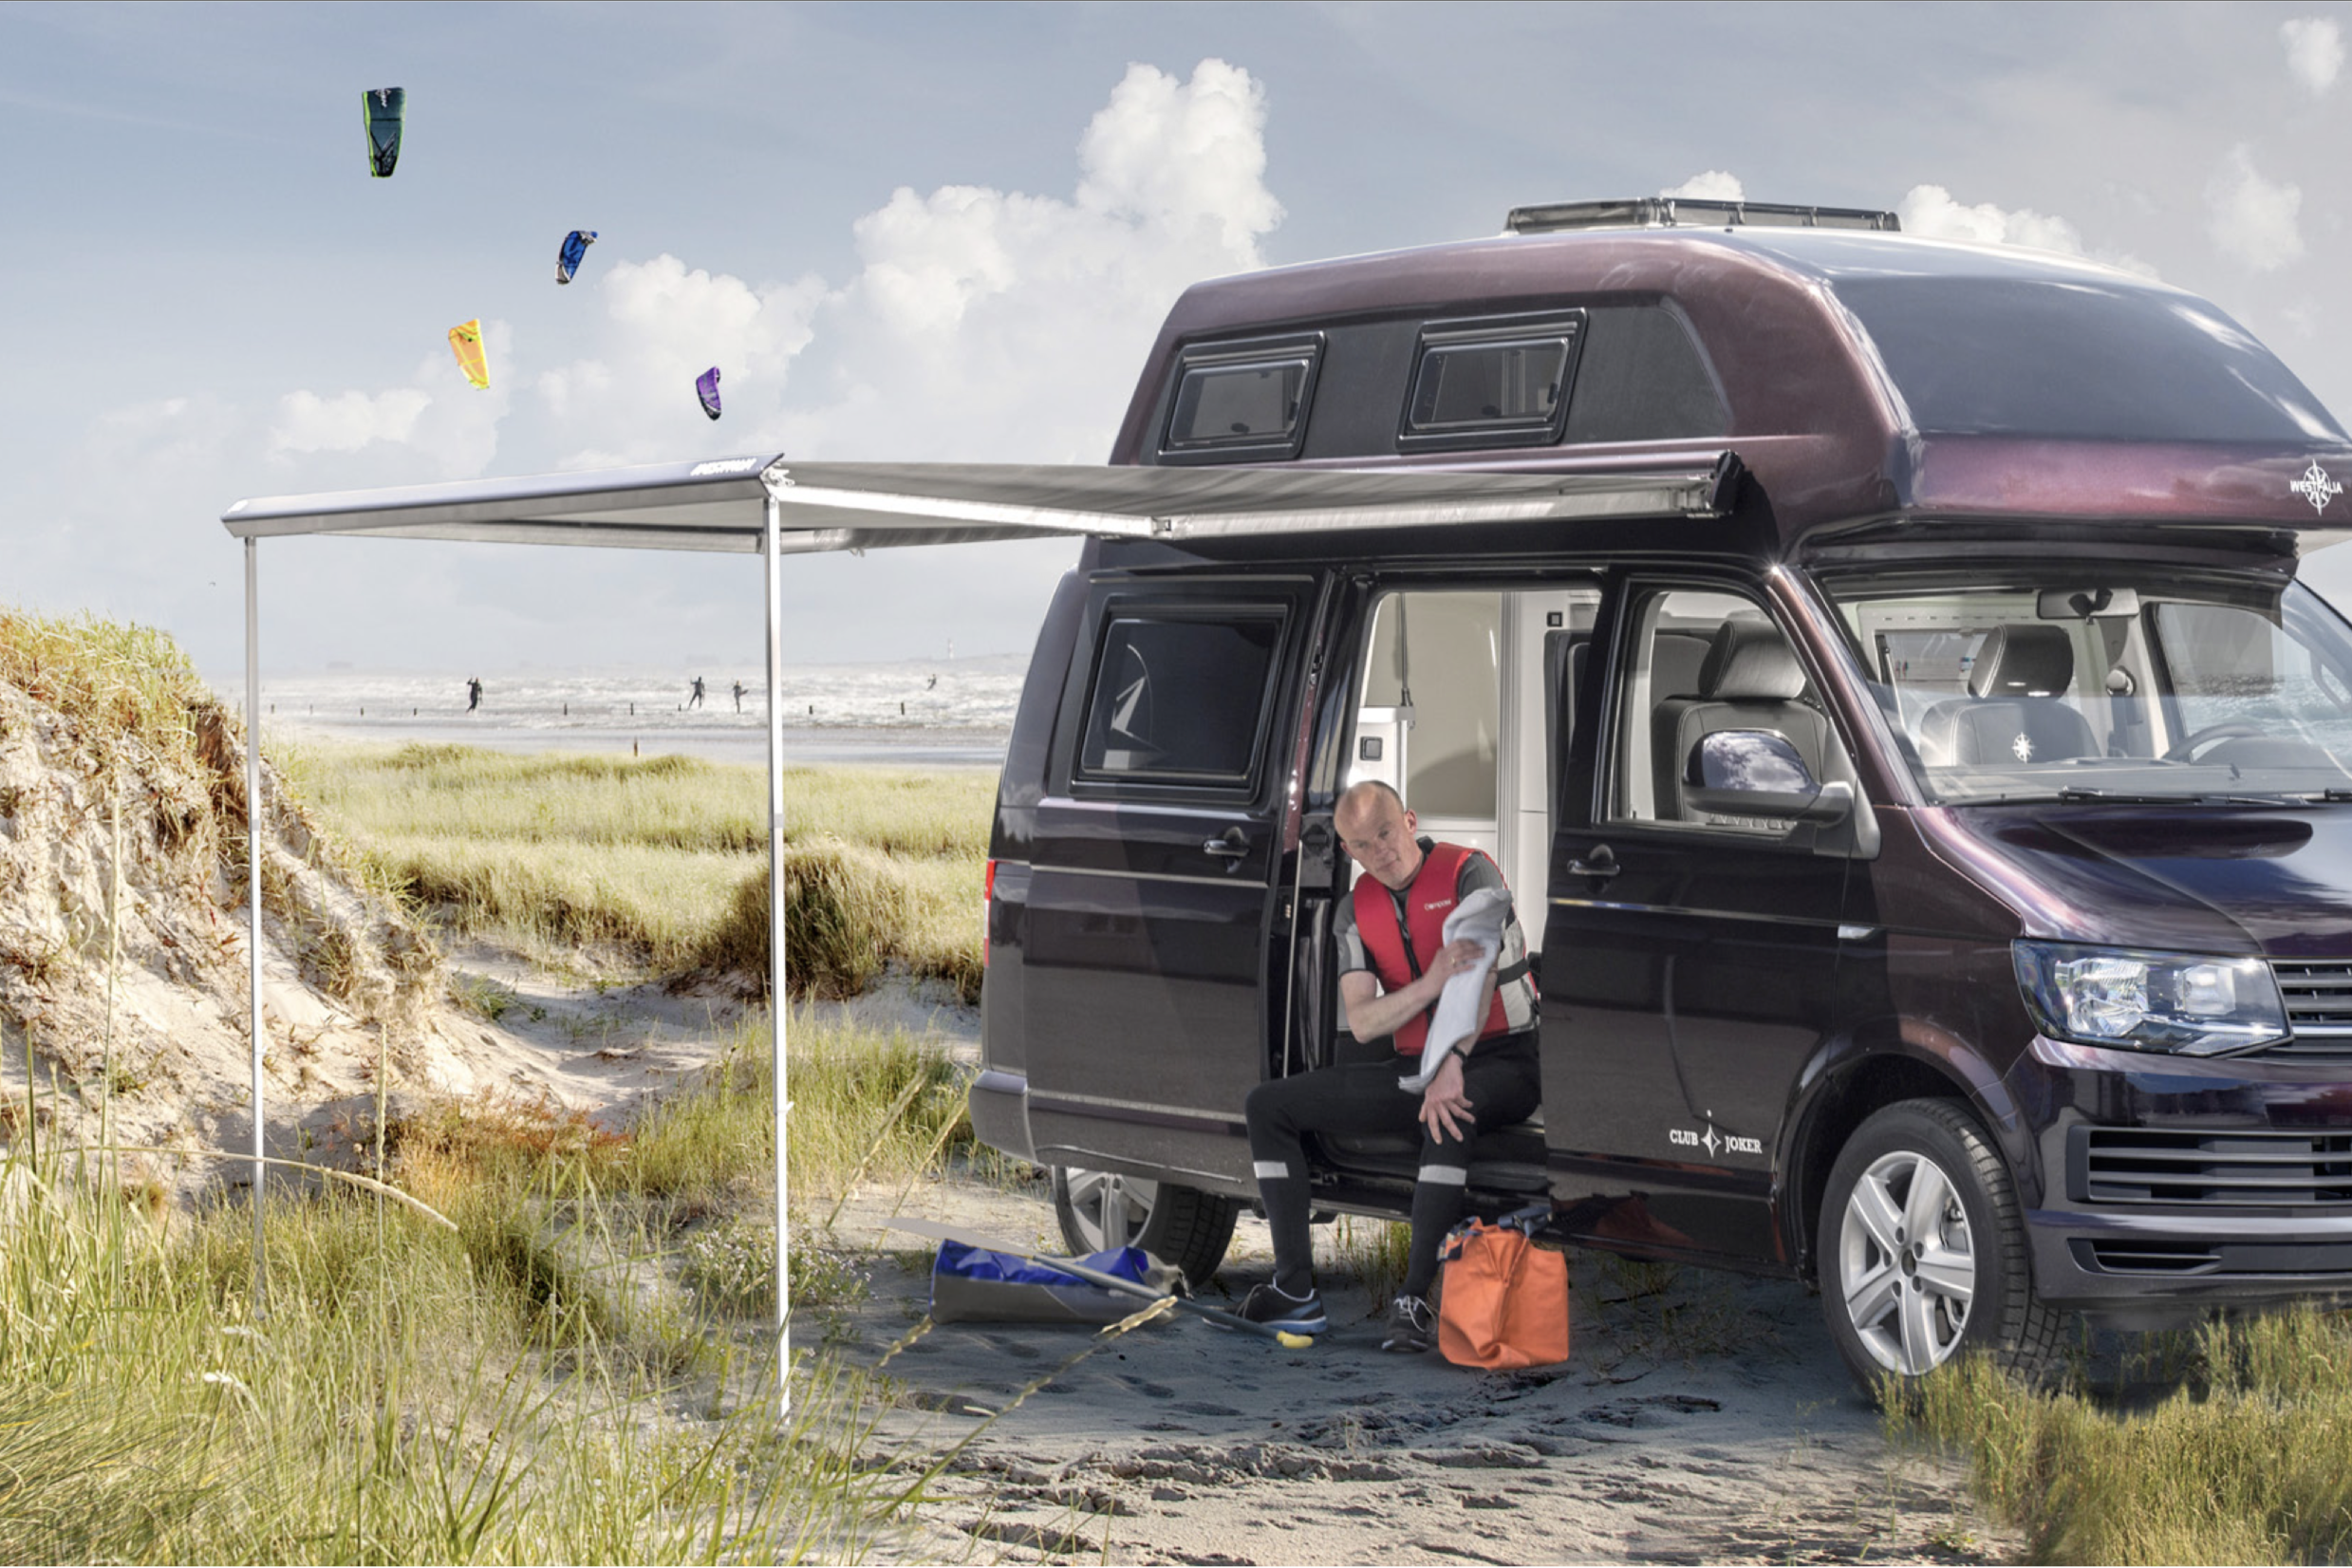 Camper vans are the smallest motorhomes, which provide many of the best benefits of self-propelled RVs and trailers — and can be affordable and practical. “If you’re trying to save money, then buying a camper van is the way to go,” says Kate Moore, who founded the travel blog <a href="https://parkedinparadise.com">Parked in Paradise</a> and lived in a camper van for two years. “They have simpler plumbing, heating, and cooling systems so there is less to go wrong — not to mention the gas mileage. Camper vans are less expensive upfront, and won’t require storage fees in the off-season. You will be sacrificing a bit of comfort traveling in a camper as opposed to a full RV. But the compact size means you can fit in smaller campgrounds and go on more rugged adventures.”